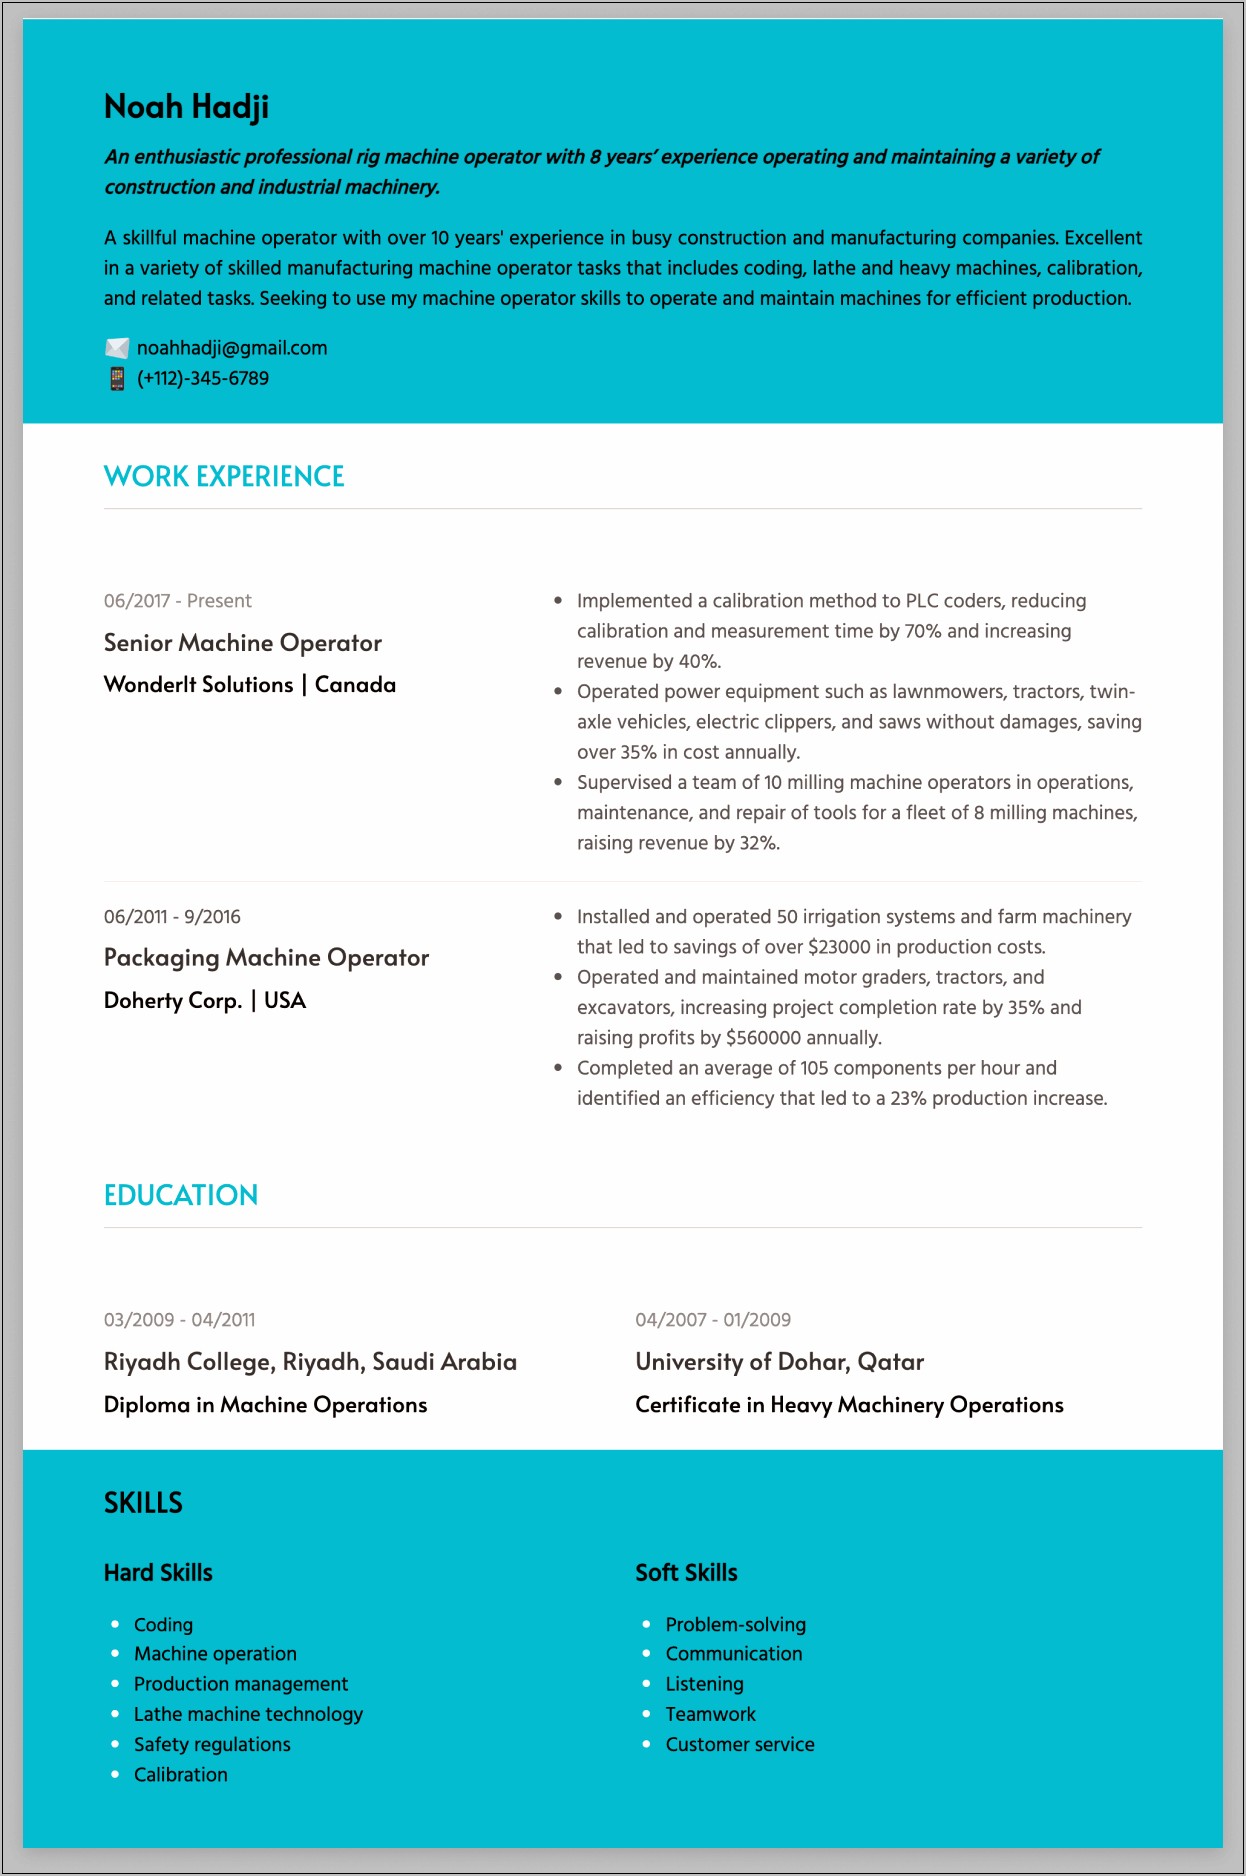 Resume Jobs Duties Examples For Production